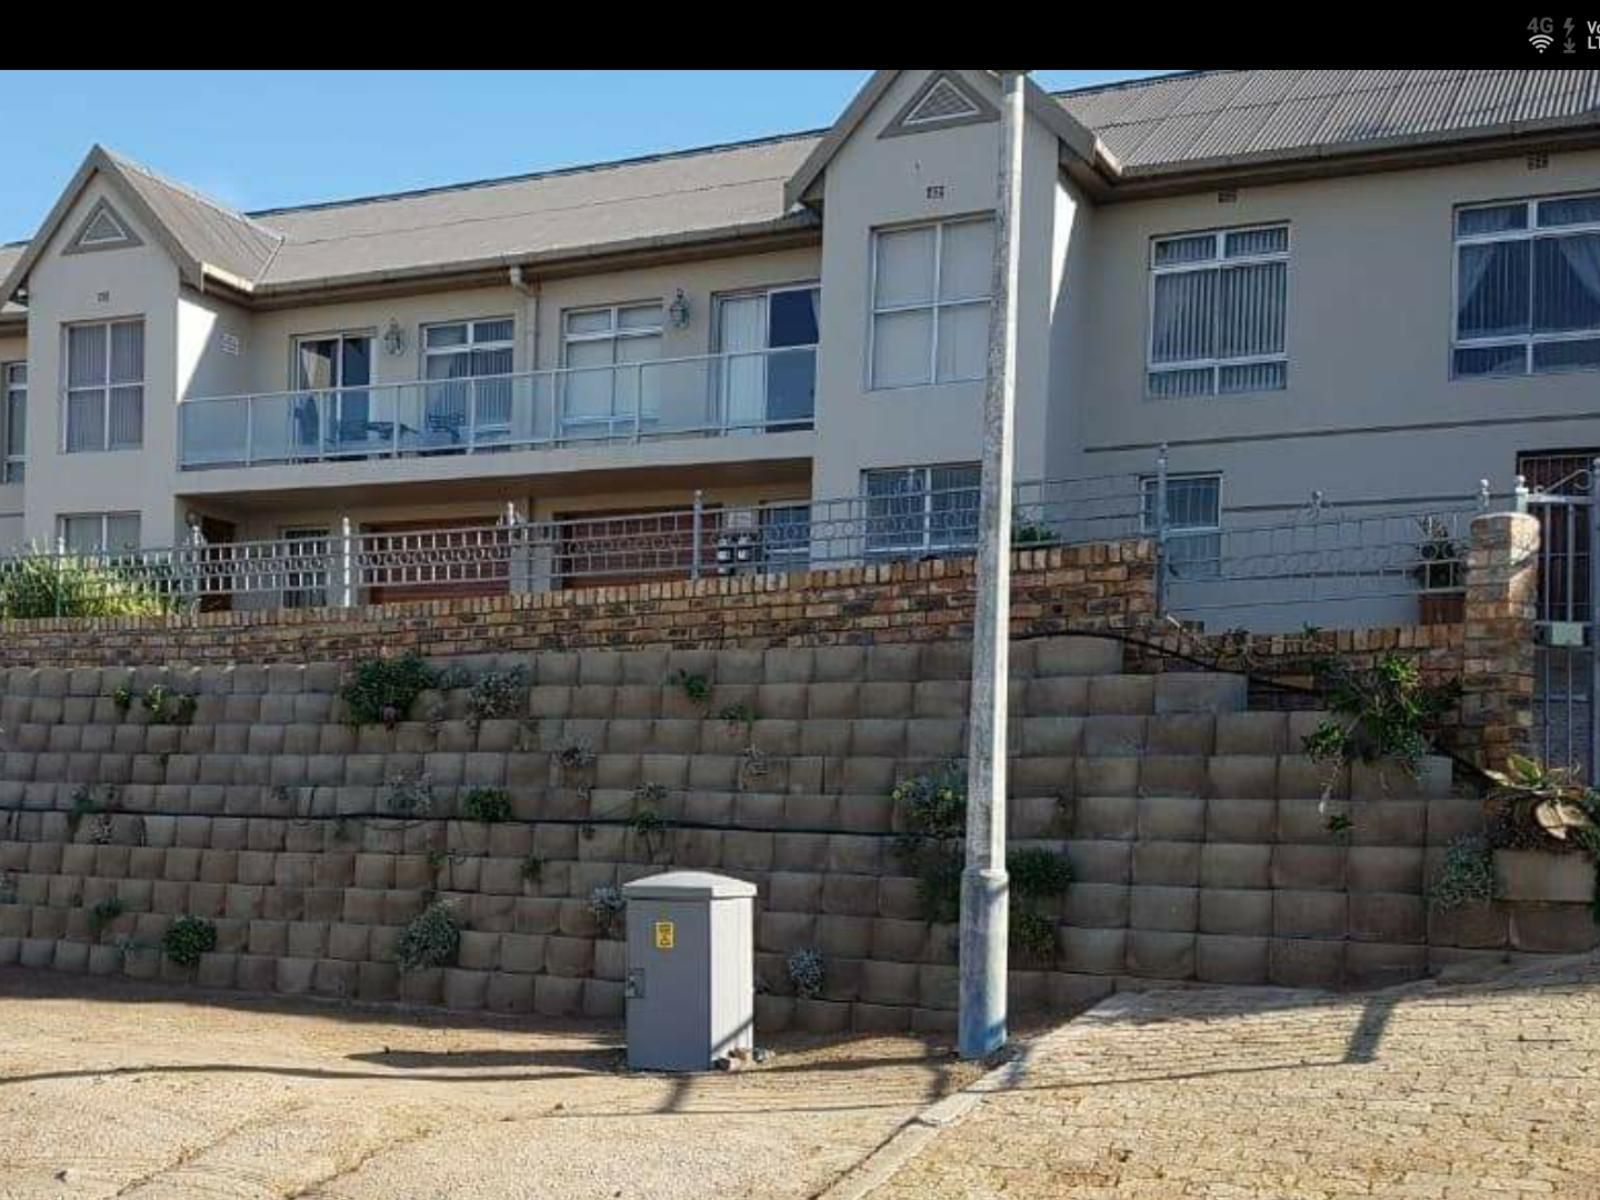 Albatross Nest Saldanha Western Cape South Africa House, Building, Architecture, Wall, Brick Texture, Texture, Swimming Pool